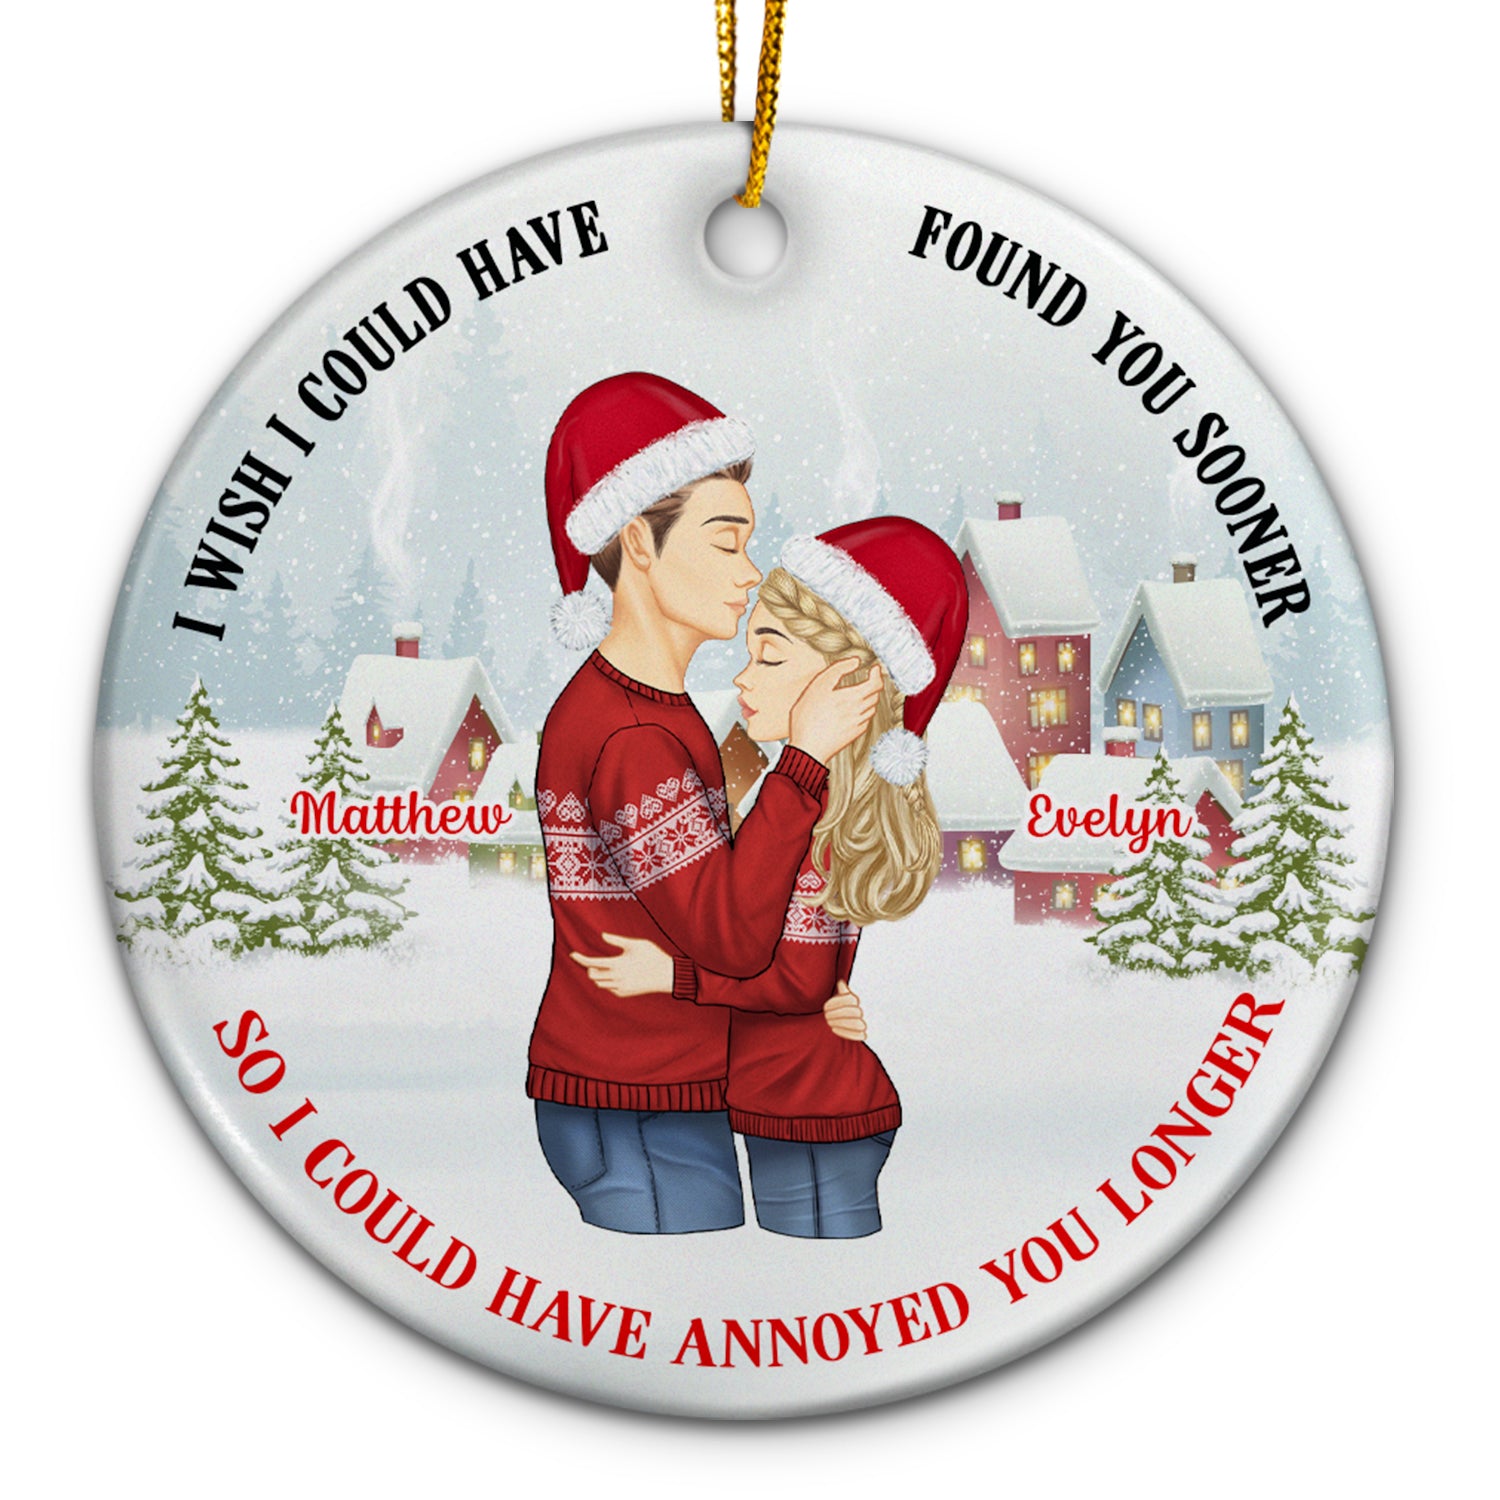 I Could Have Found You Sooner - Christmas, Gift For Couples - Personalized Circle Ceramic Ornament